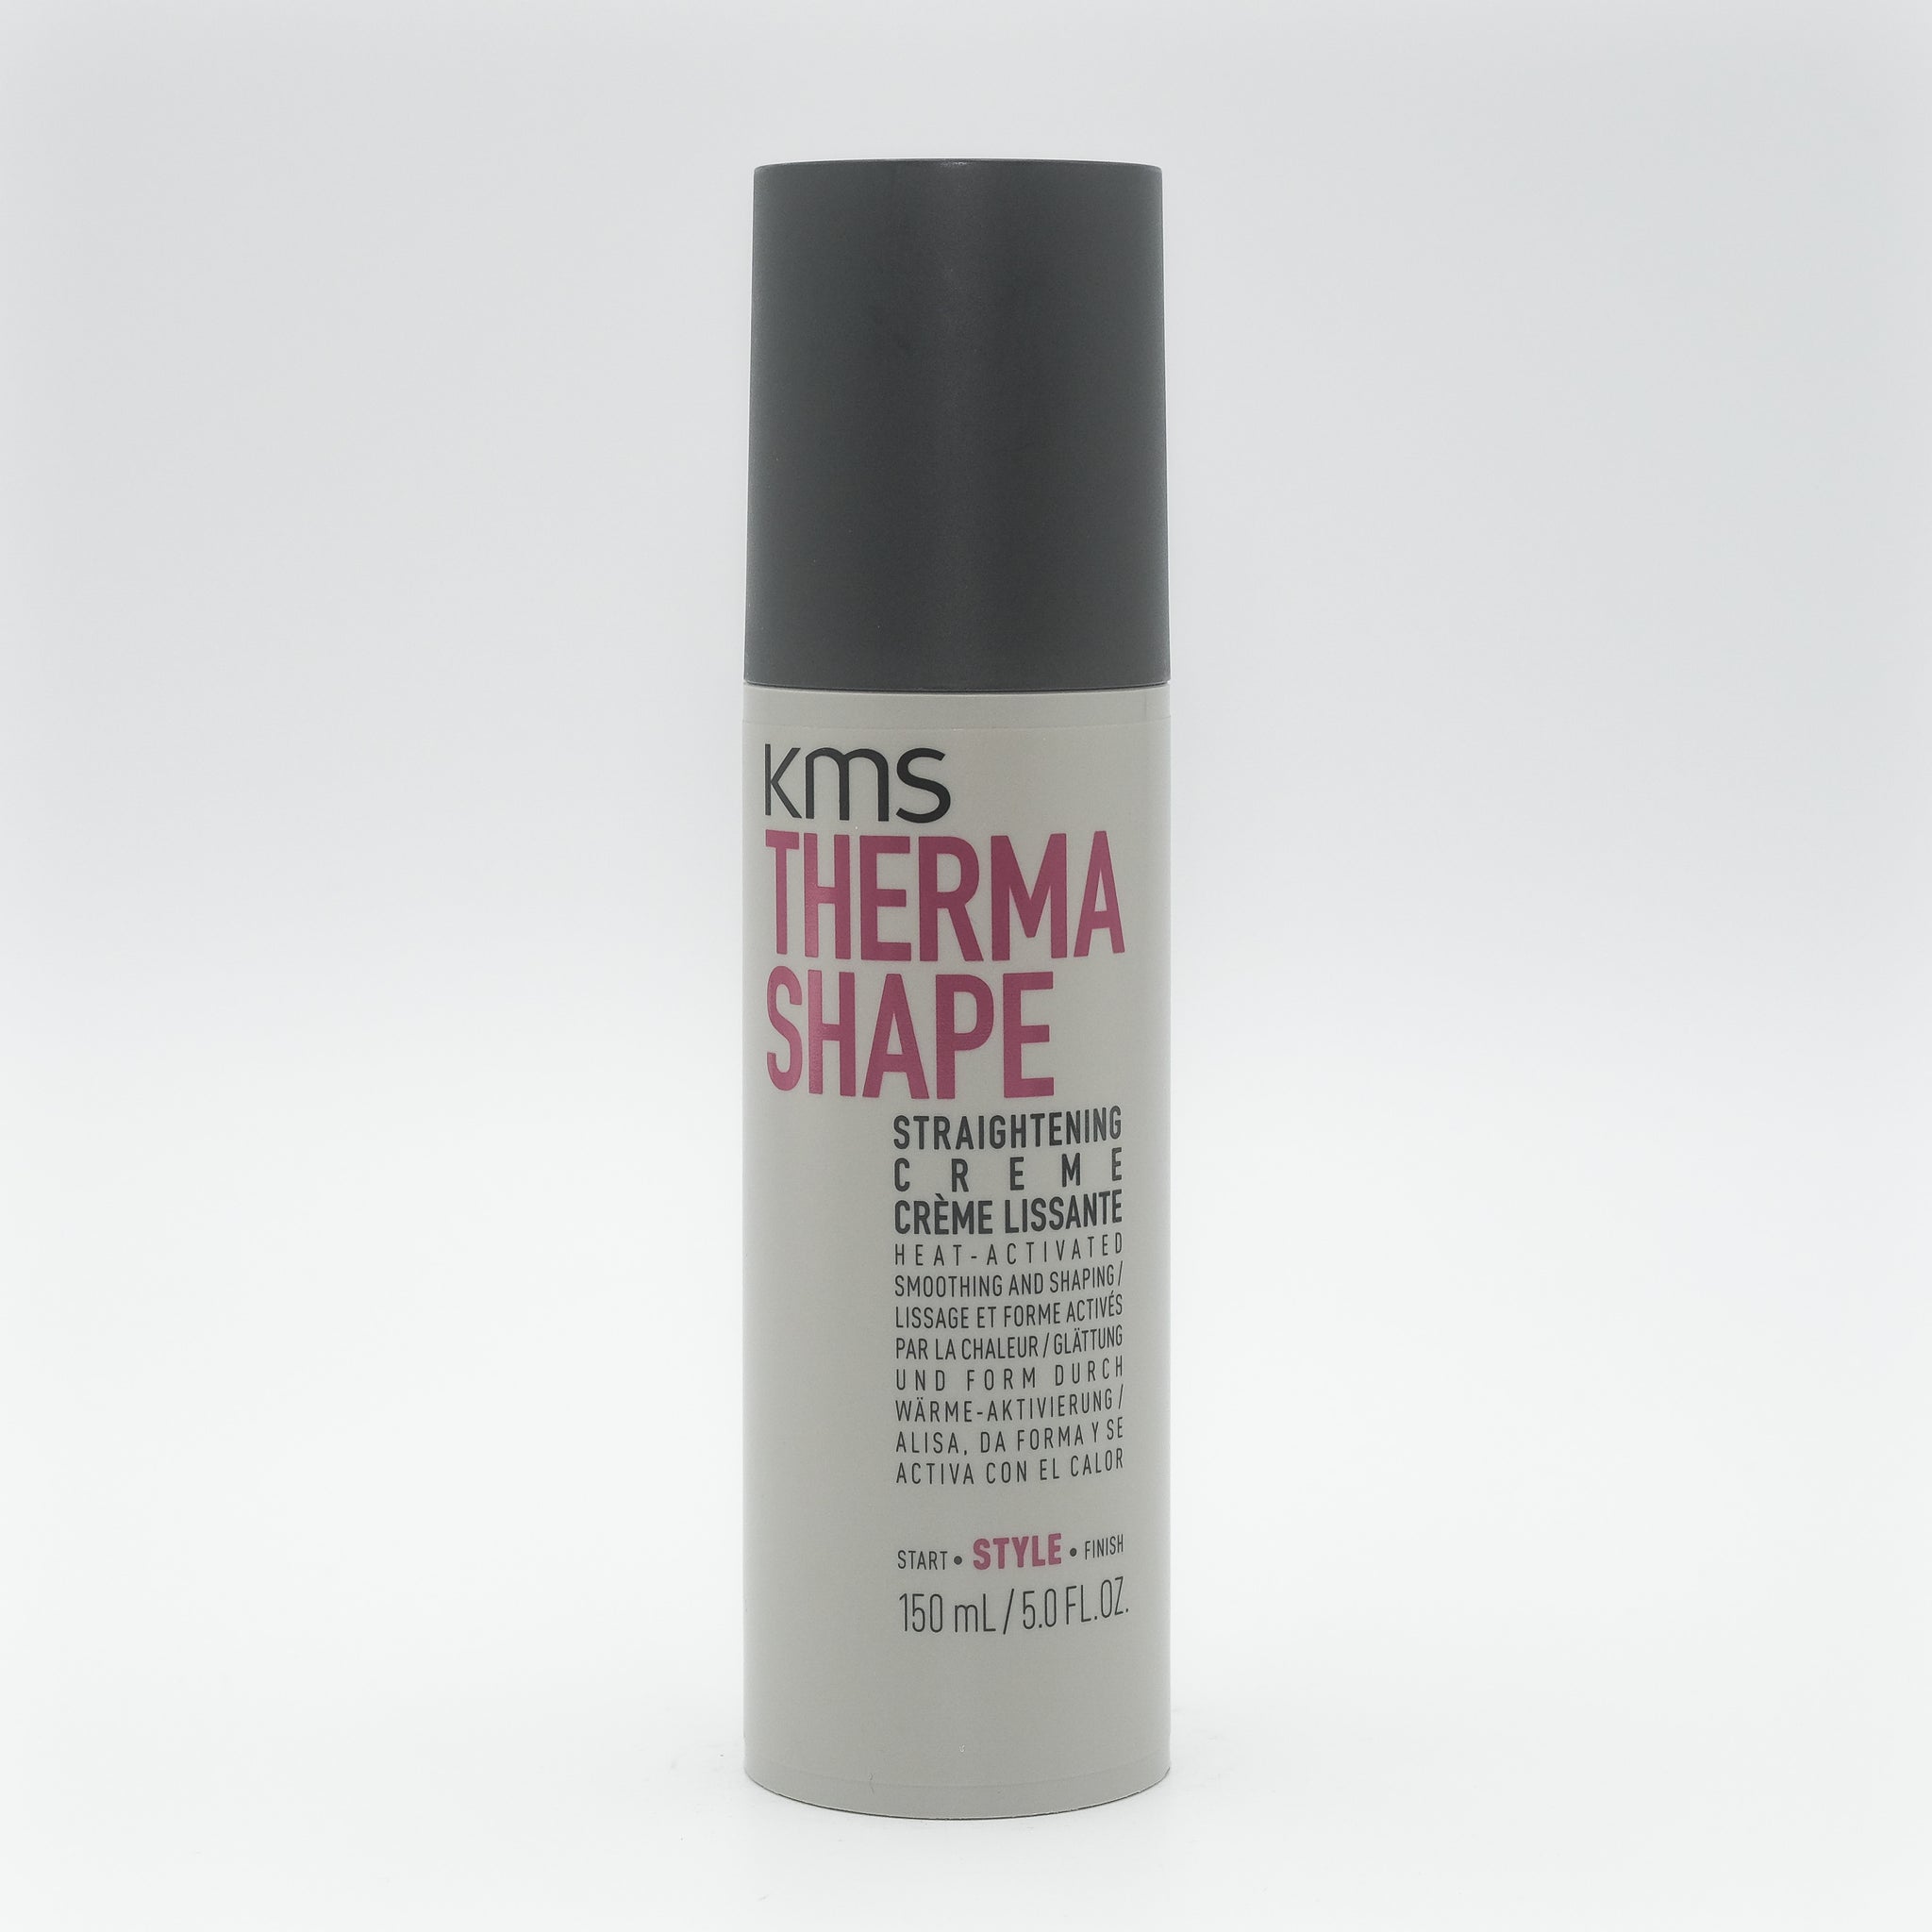 KMS Therma Shape Straightening Creme 5 oz